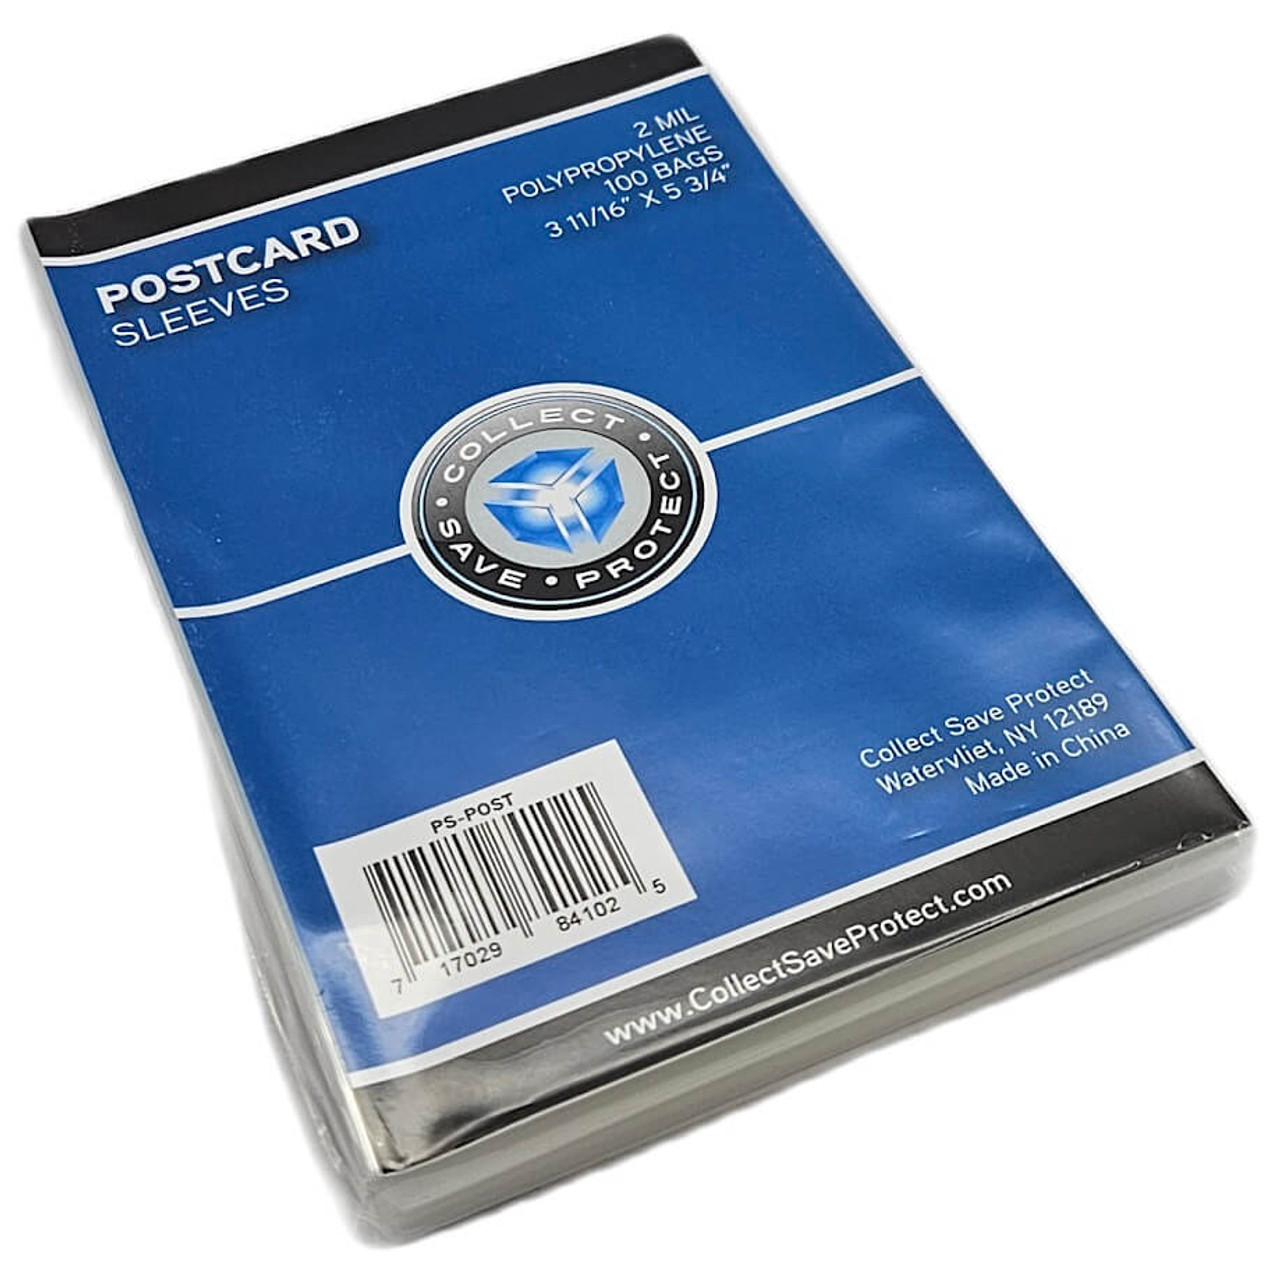 CSP Continental Postcard Sleeves (100 Count Pack)